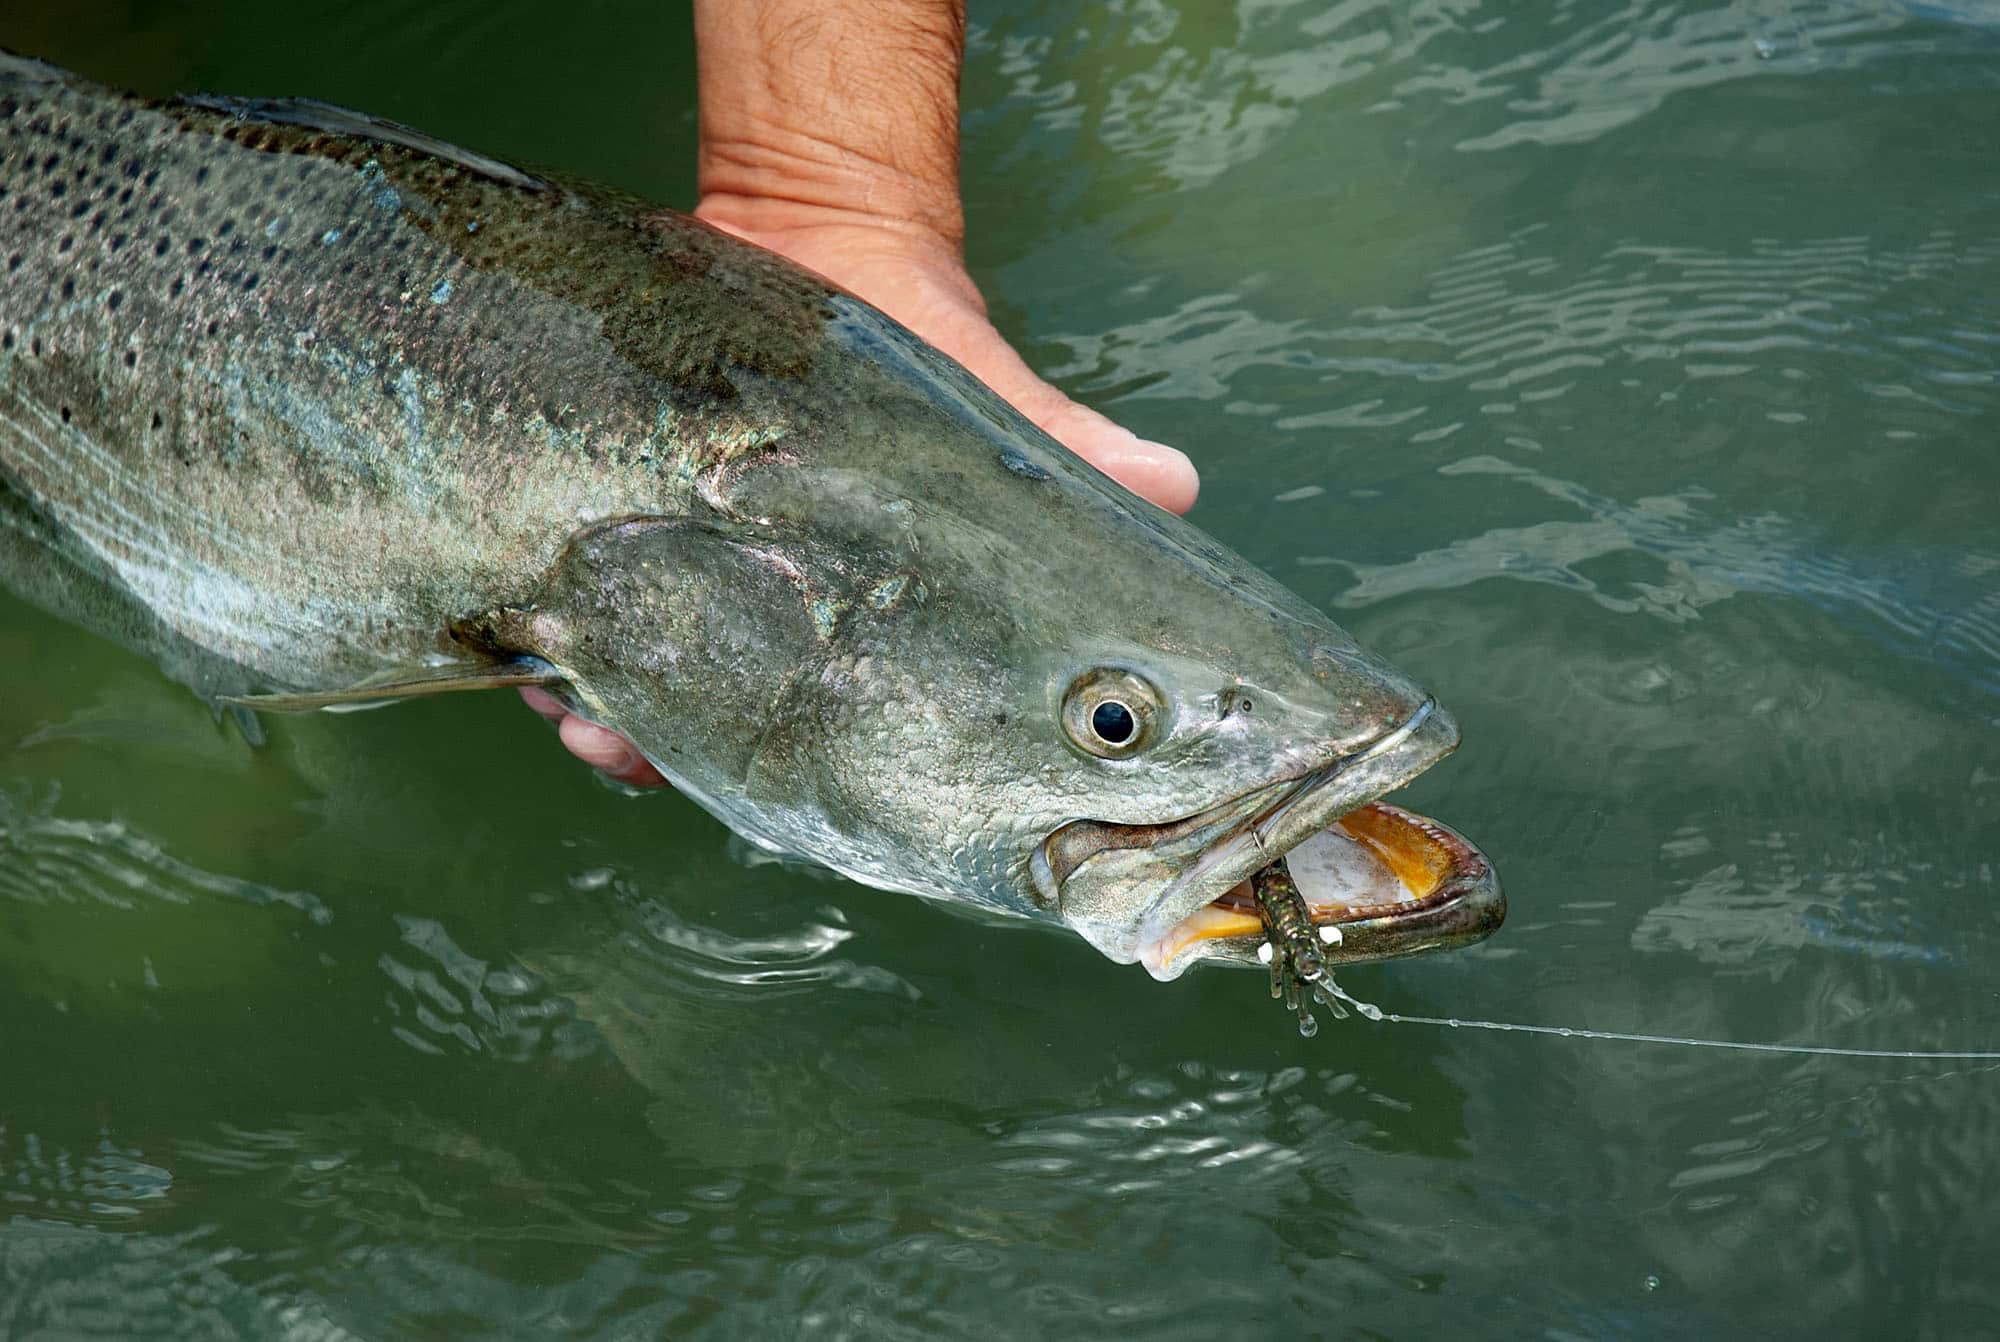 How to Catch Speckled Trout - Get the Know How